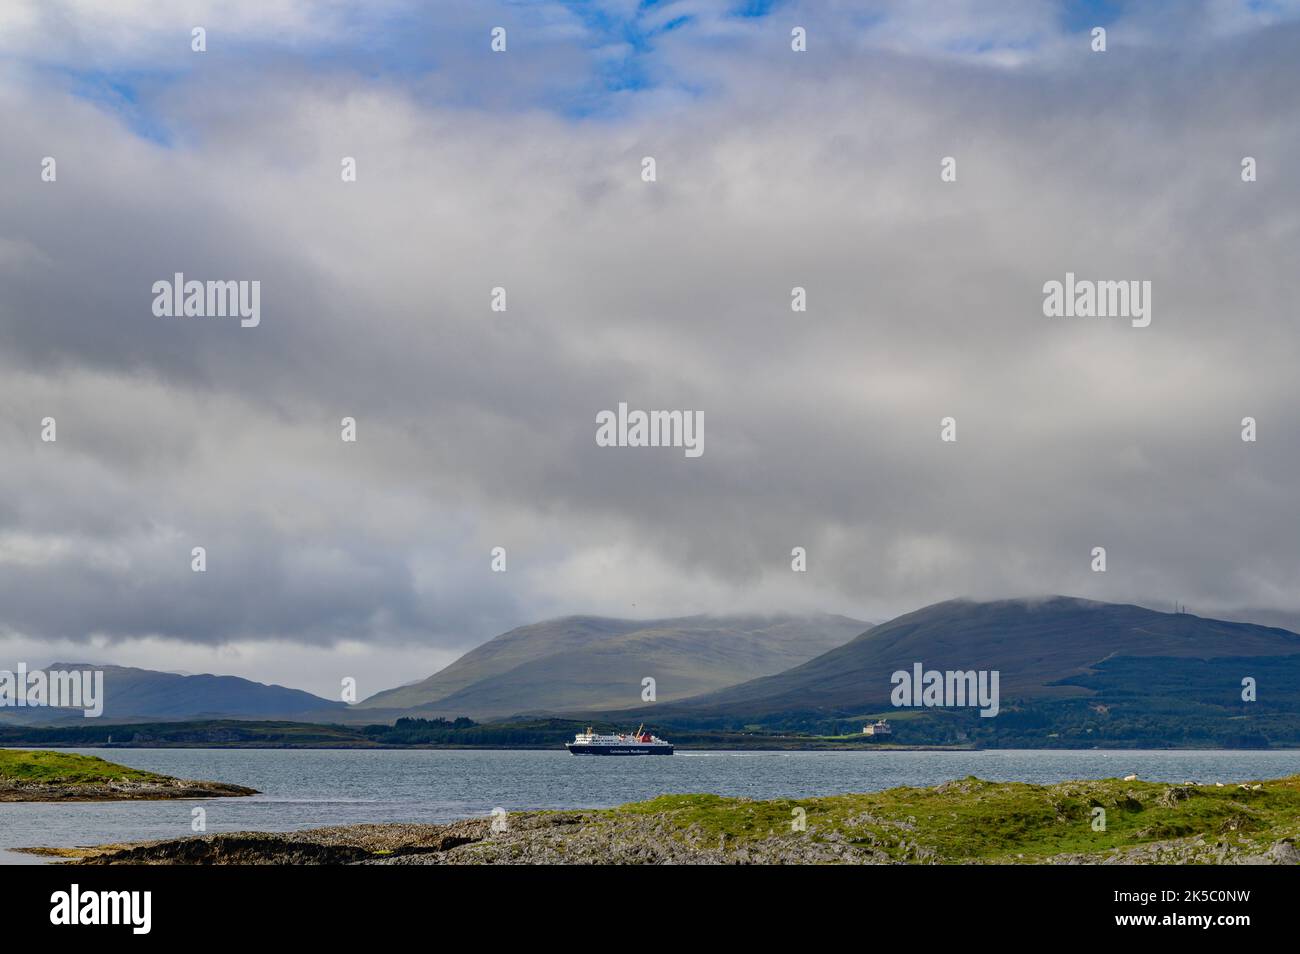 Calmac Ferry in The Sound of Mull, Argyll and Bute, Scotland Stock Photo